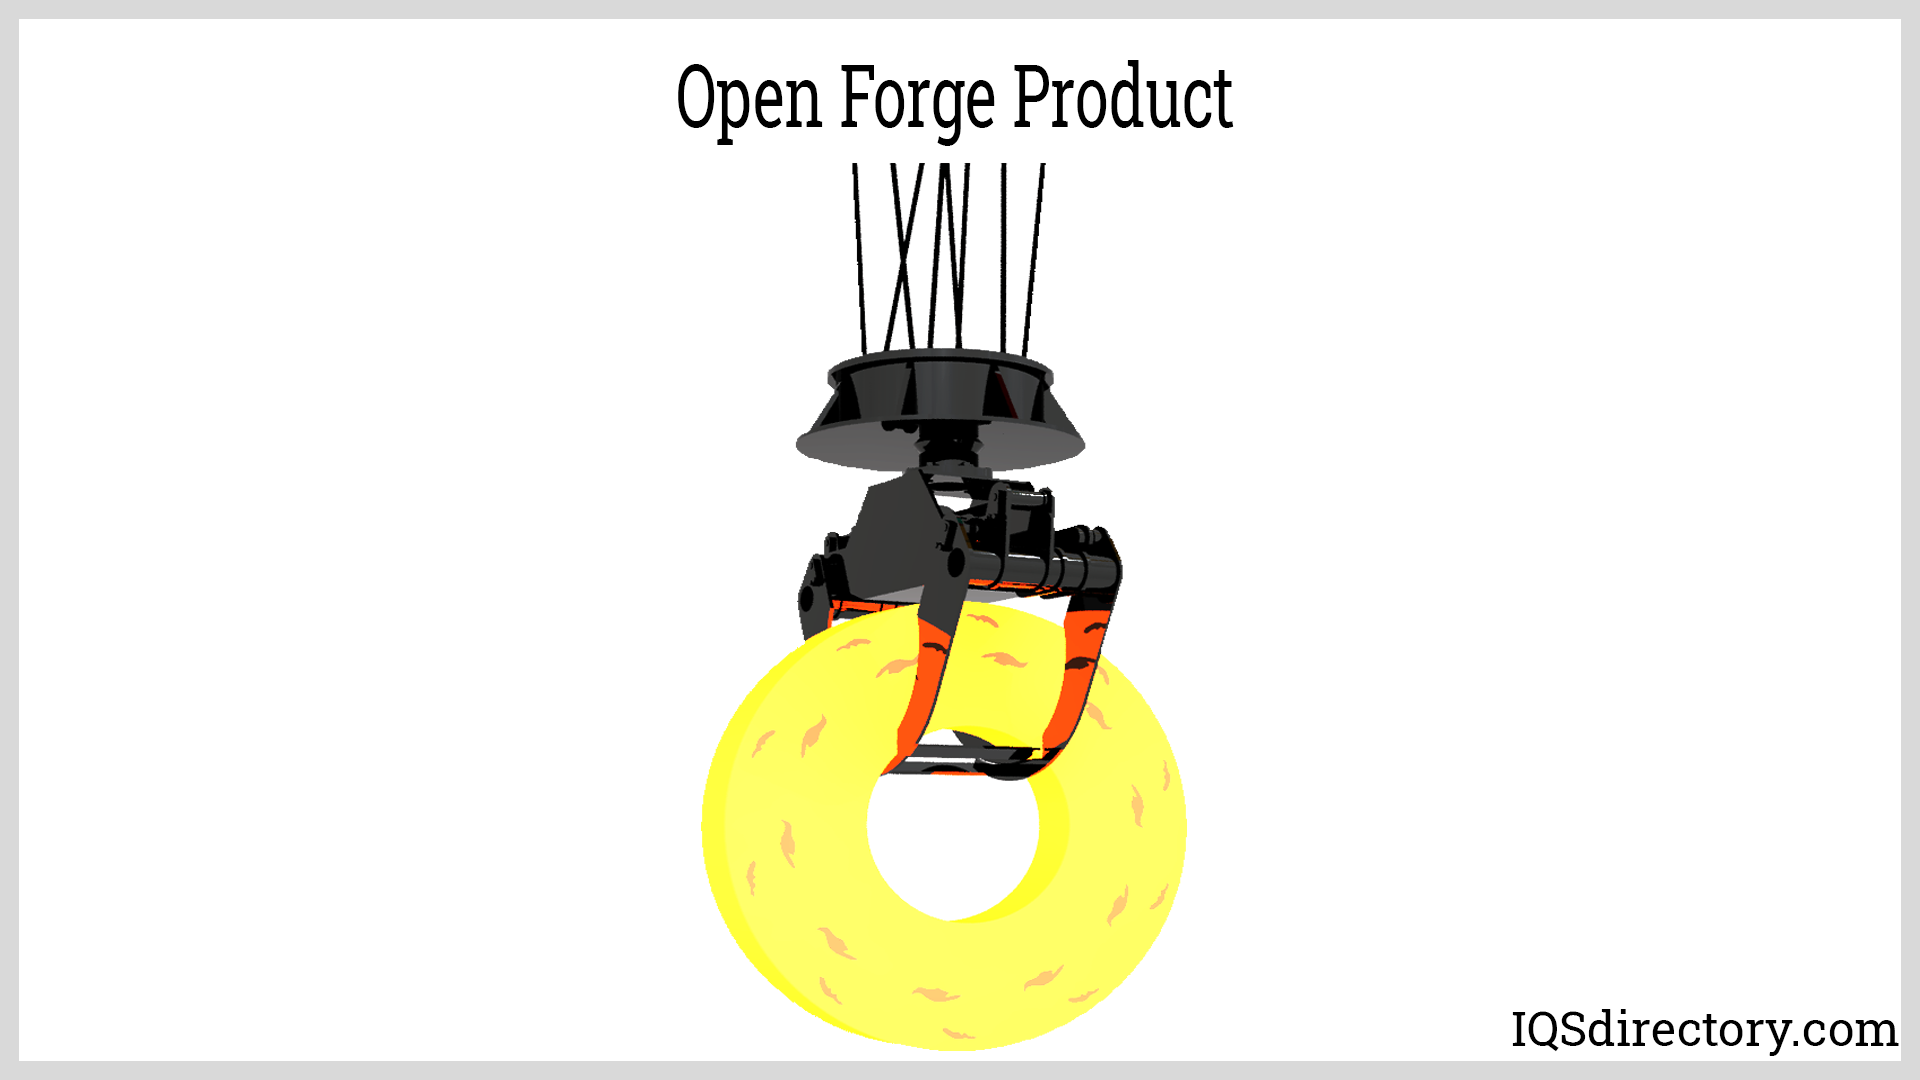 Open Forge Product